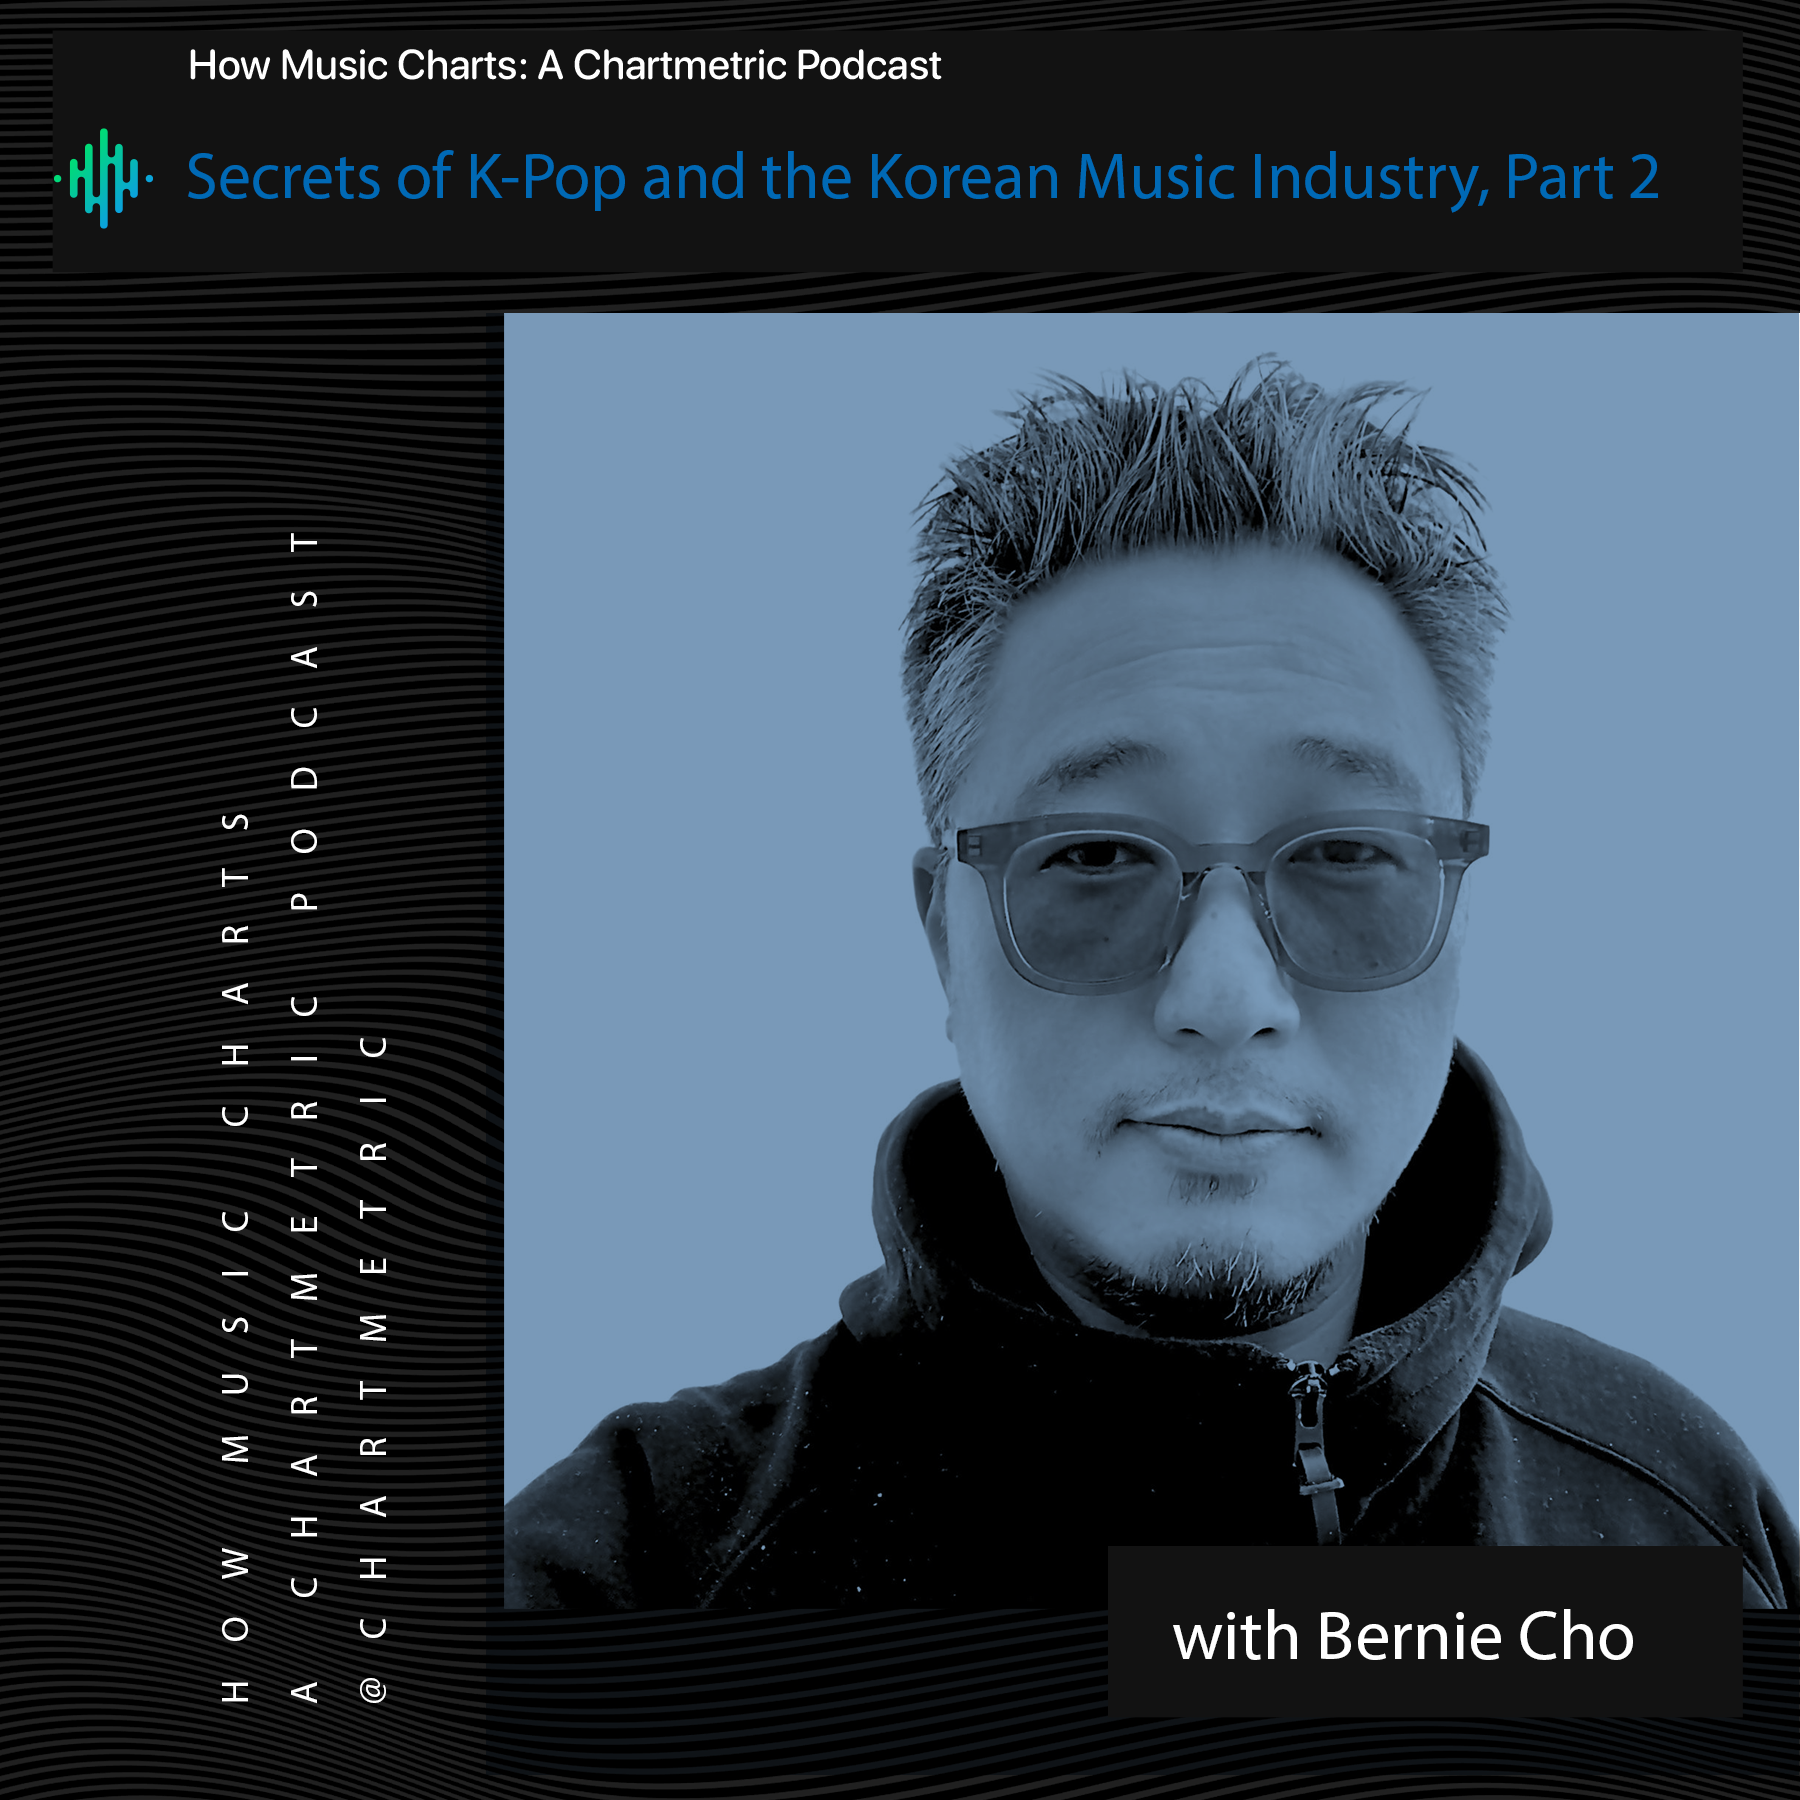 Secrets of K-Pop and the Korean Music Industry With Bernie Cho, Part 2